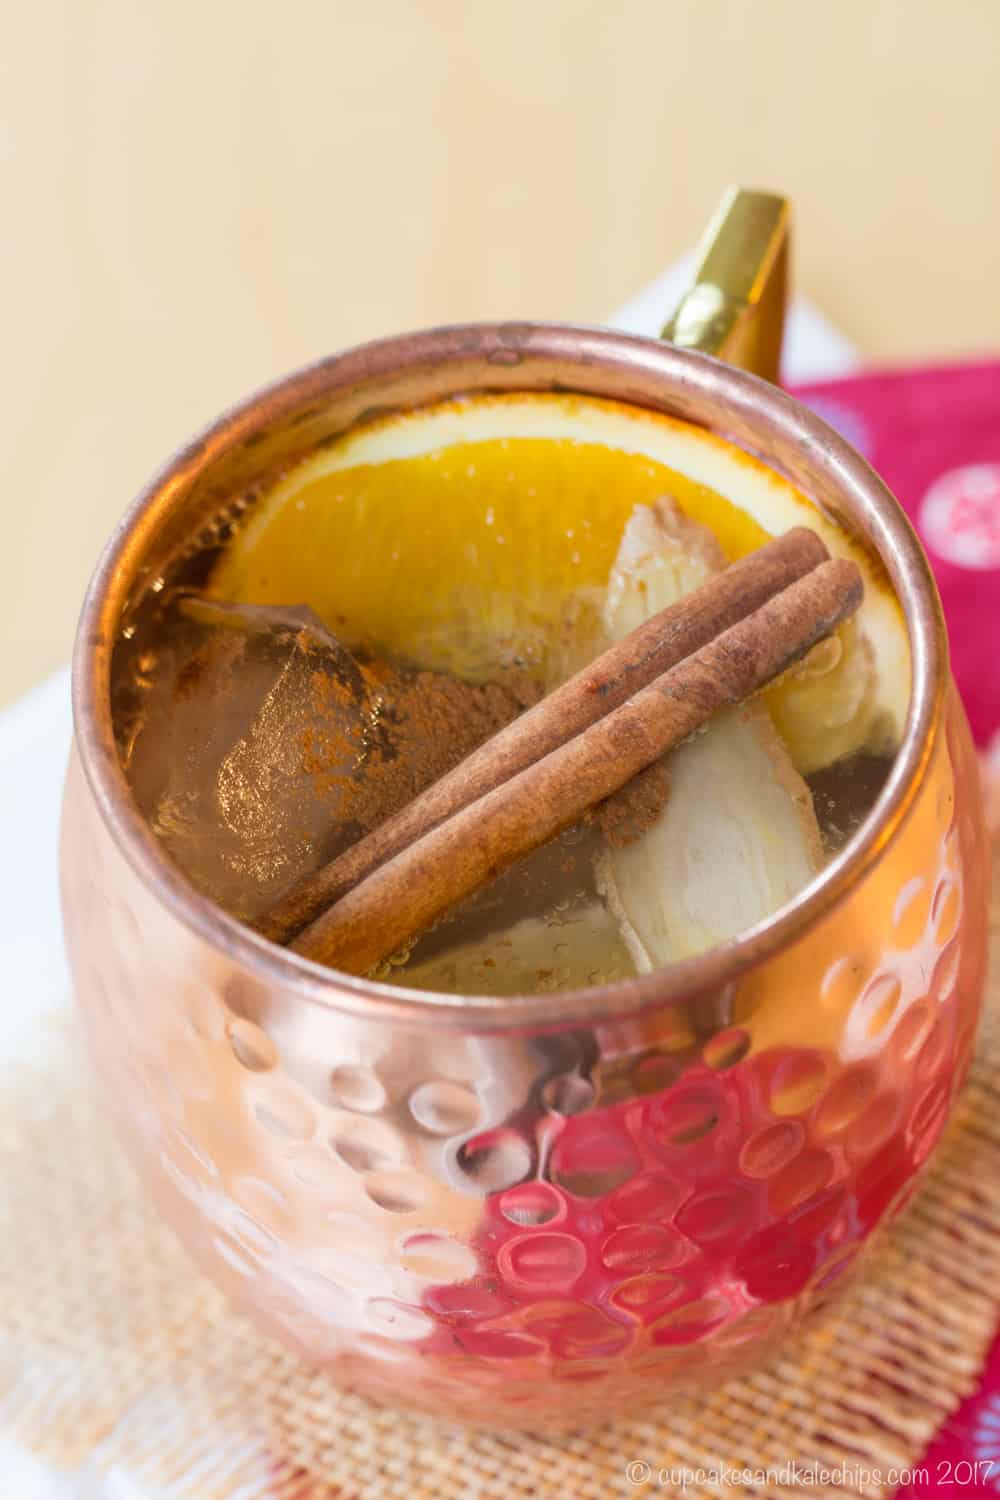 Looking down into a cold toddy whiskey mule cocktail in a copper mug on a piece of burlap with orange, lemon, cinnamon stick, and a slice of fresh ginger as garnishes.